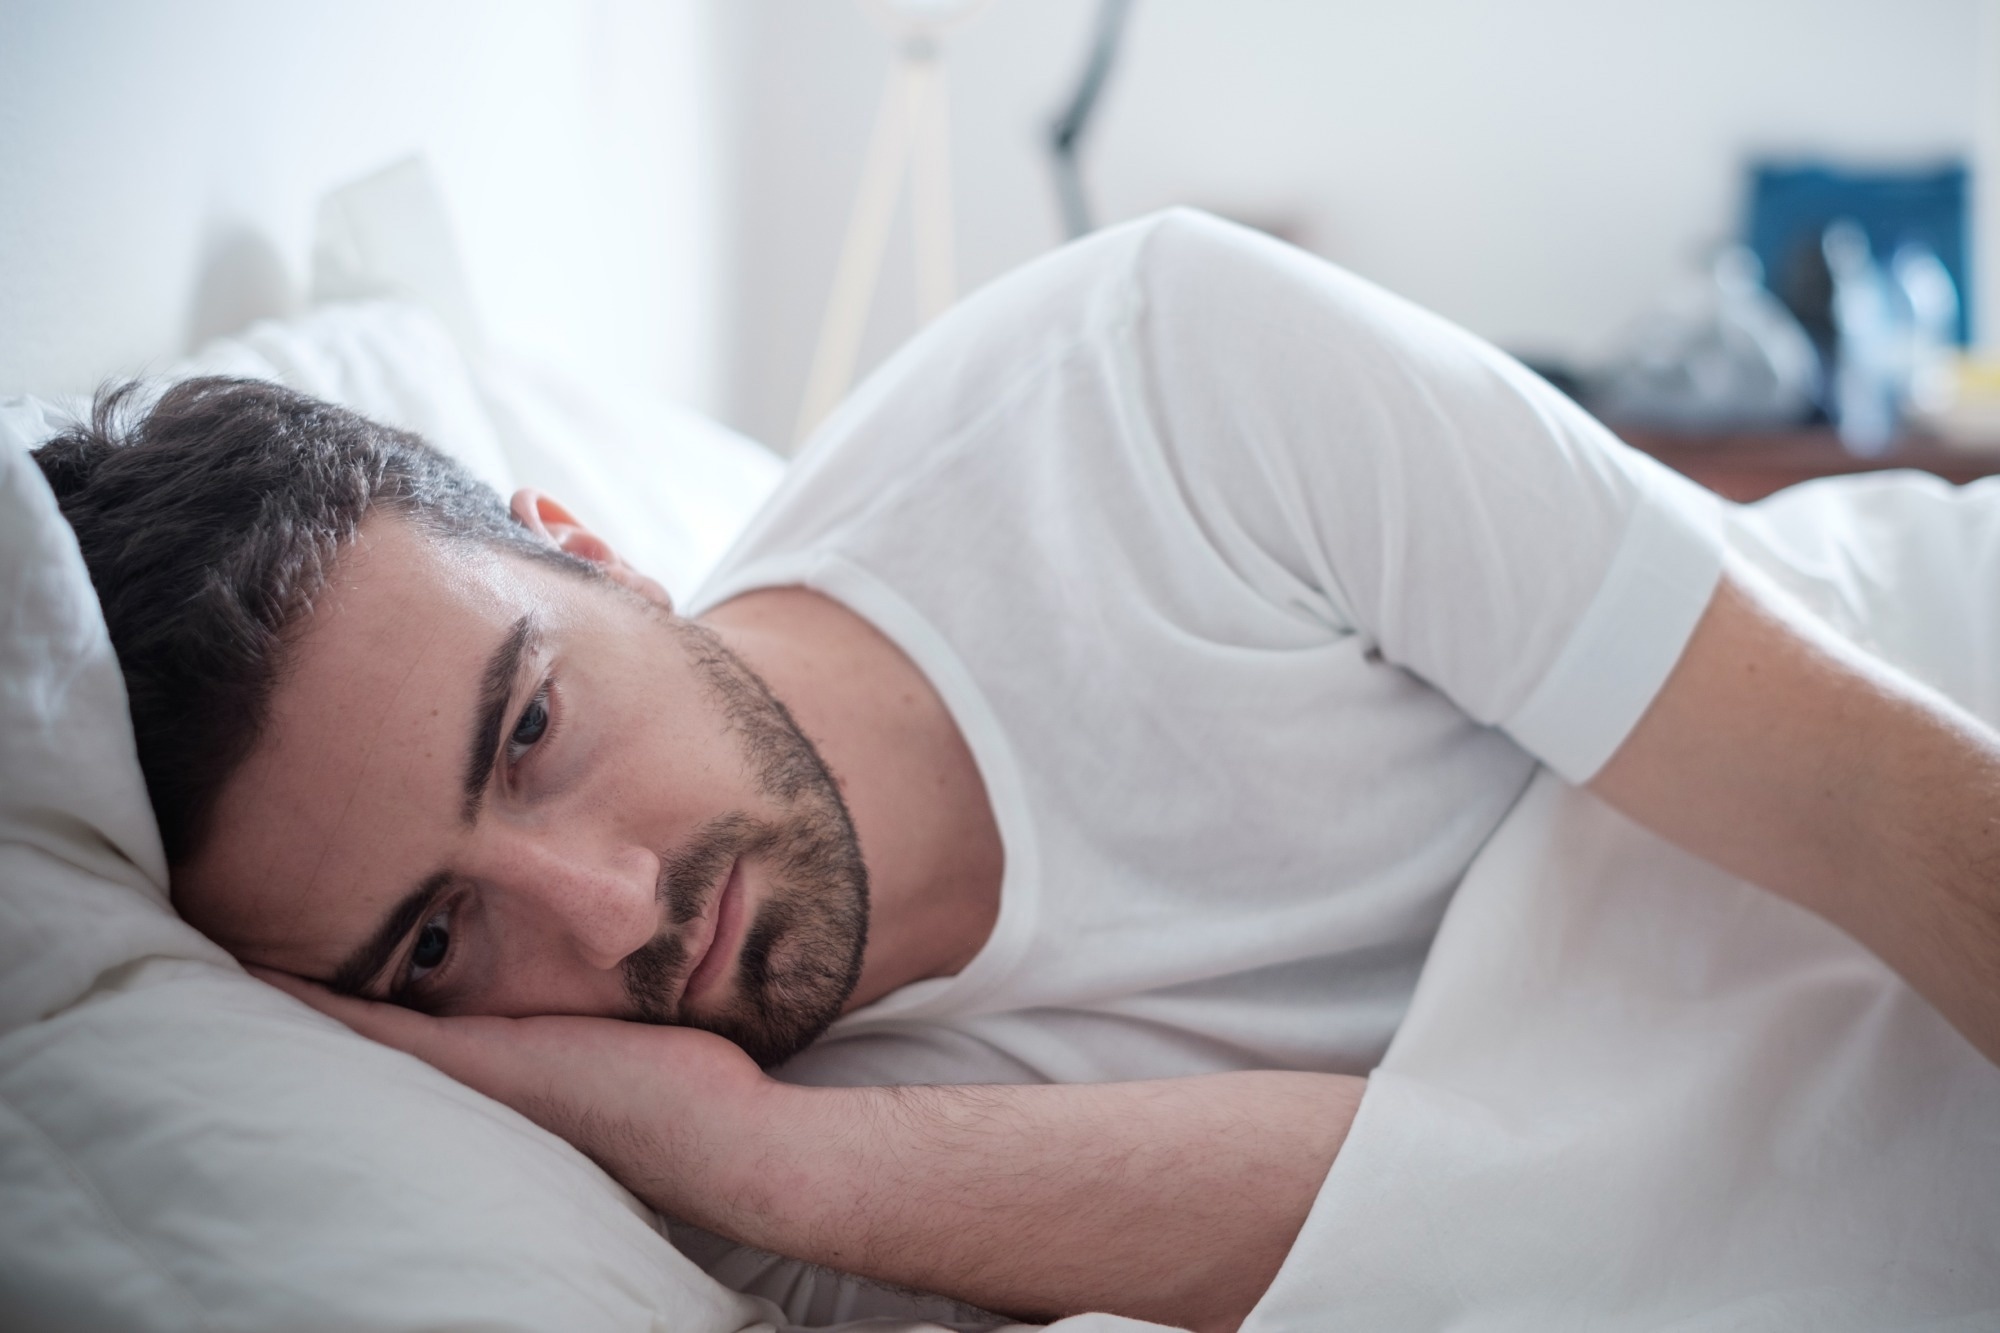 Study: Impaired health-related quality of life in long-COVID syndrome after mild to moderate COVID-19. Image Credit: tommaso79 / Shutterstock.com